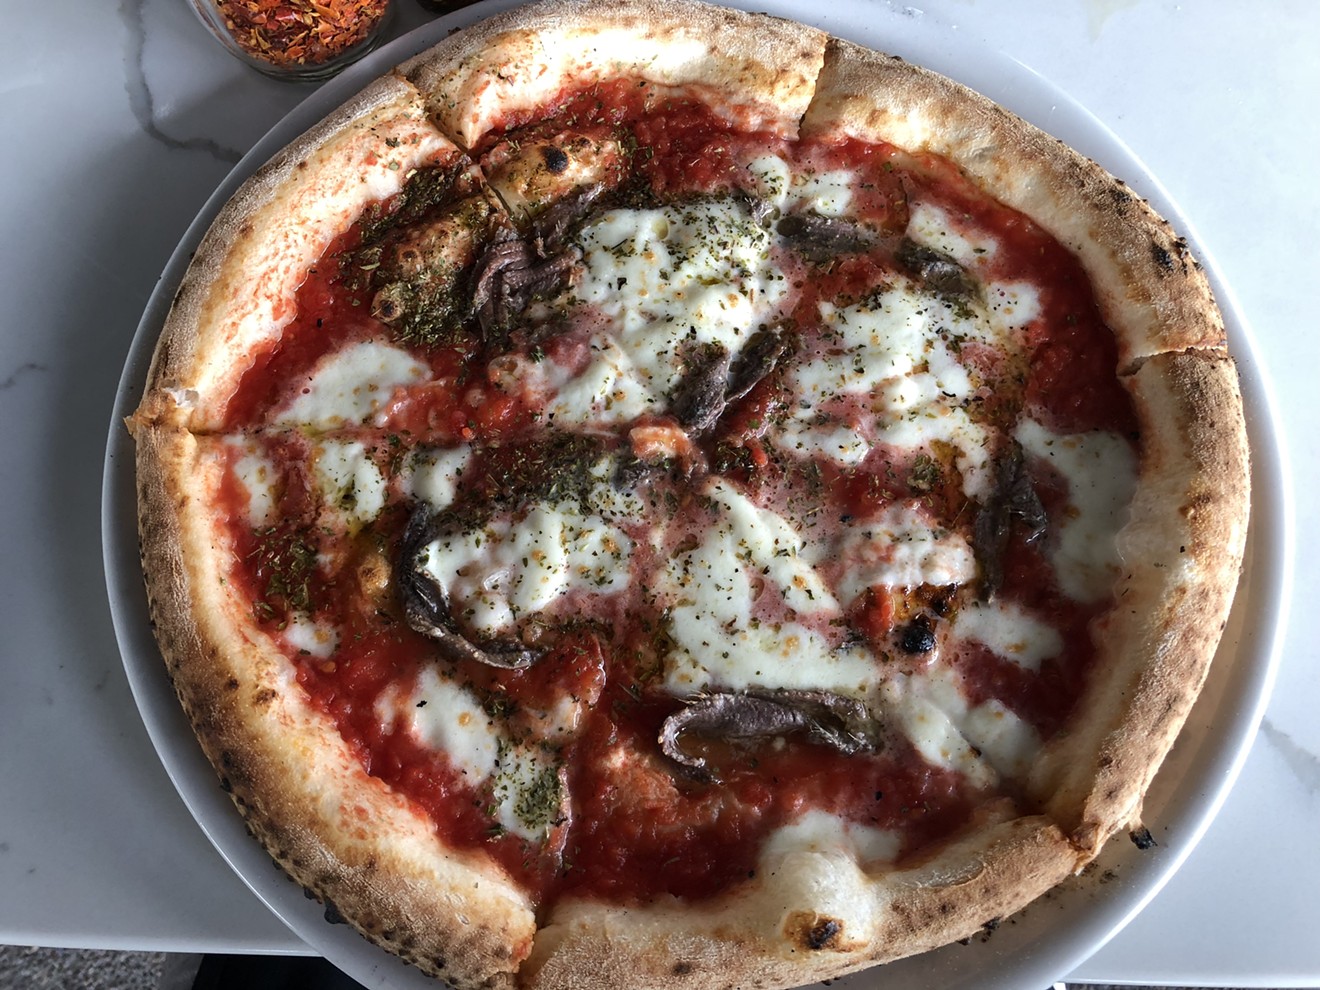 The Neapolitan pizza at Pomo will be back as its downtown Phoenix location re-opens Thursday, October 25.